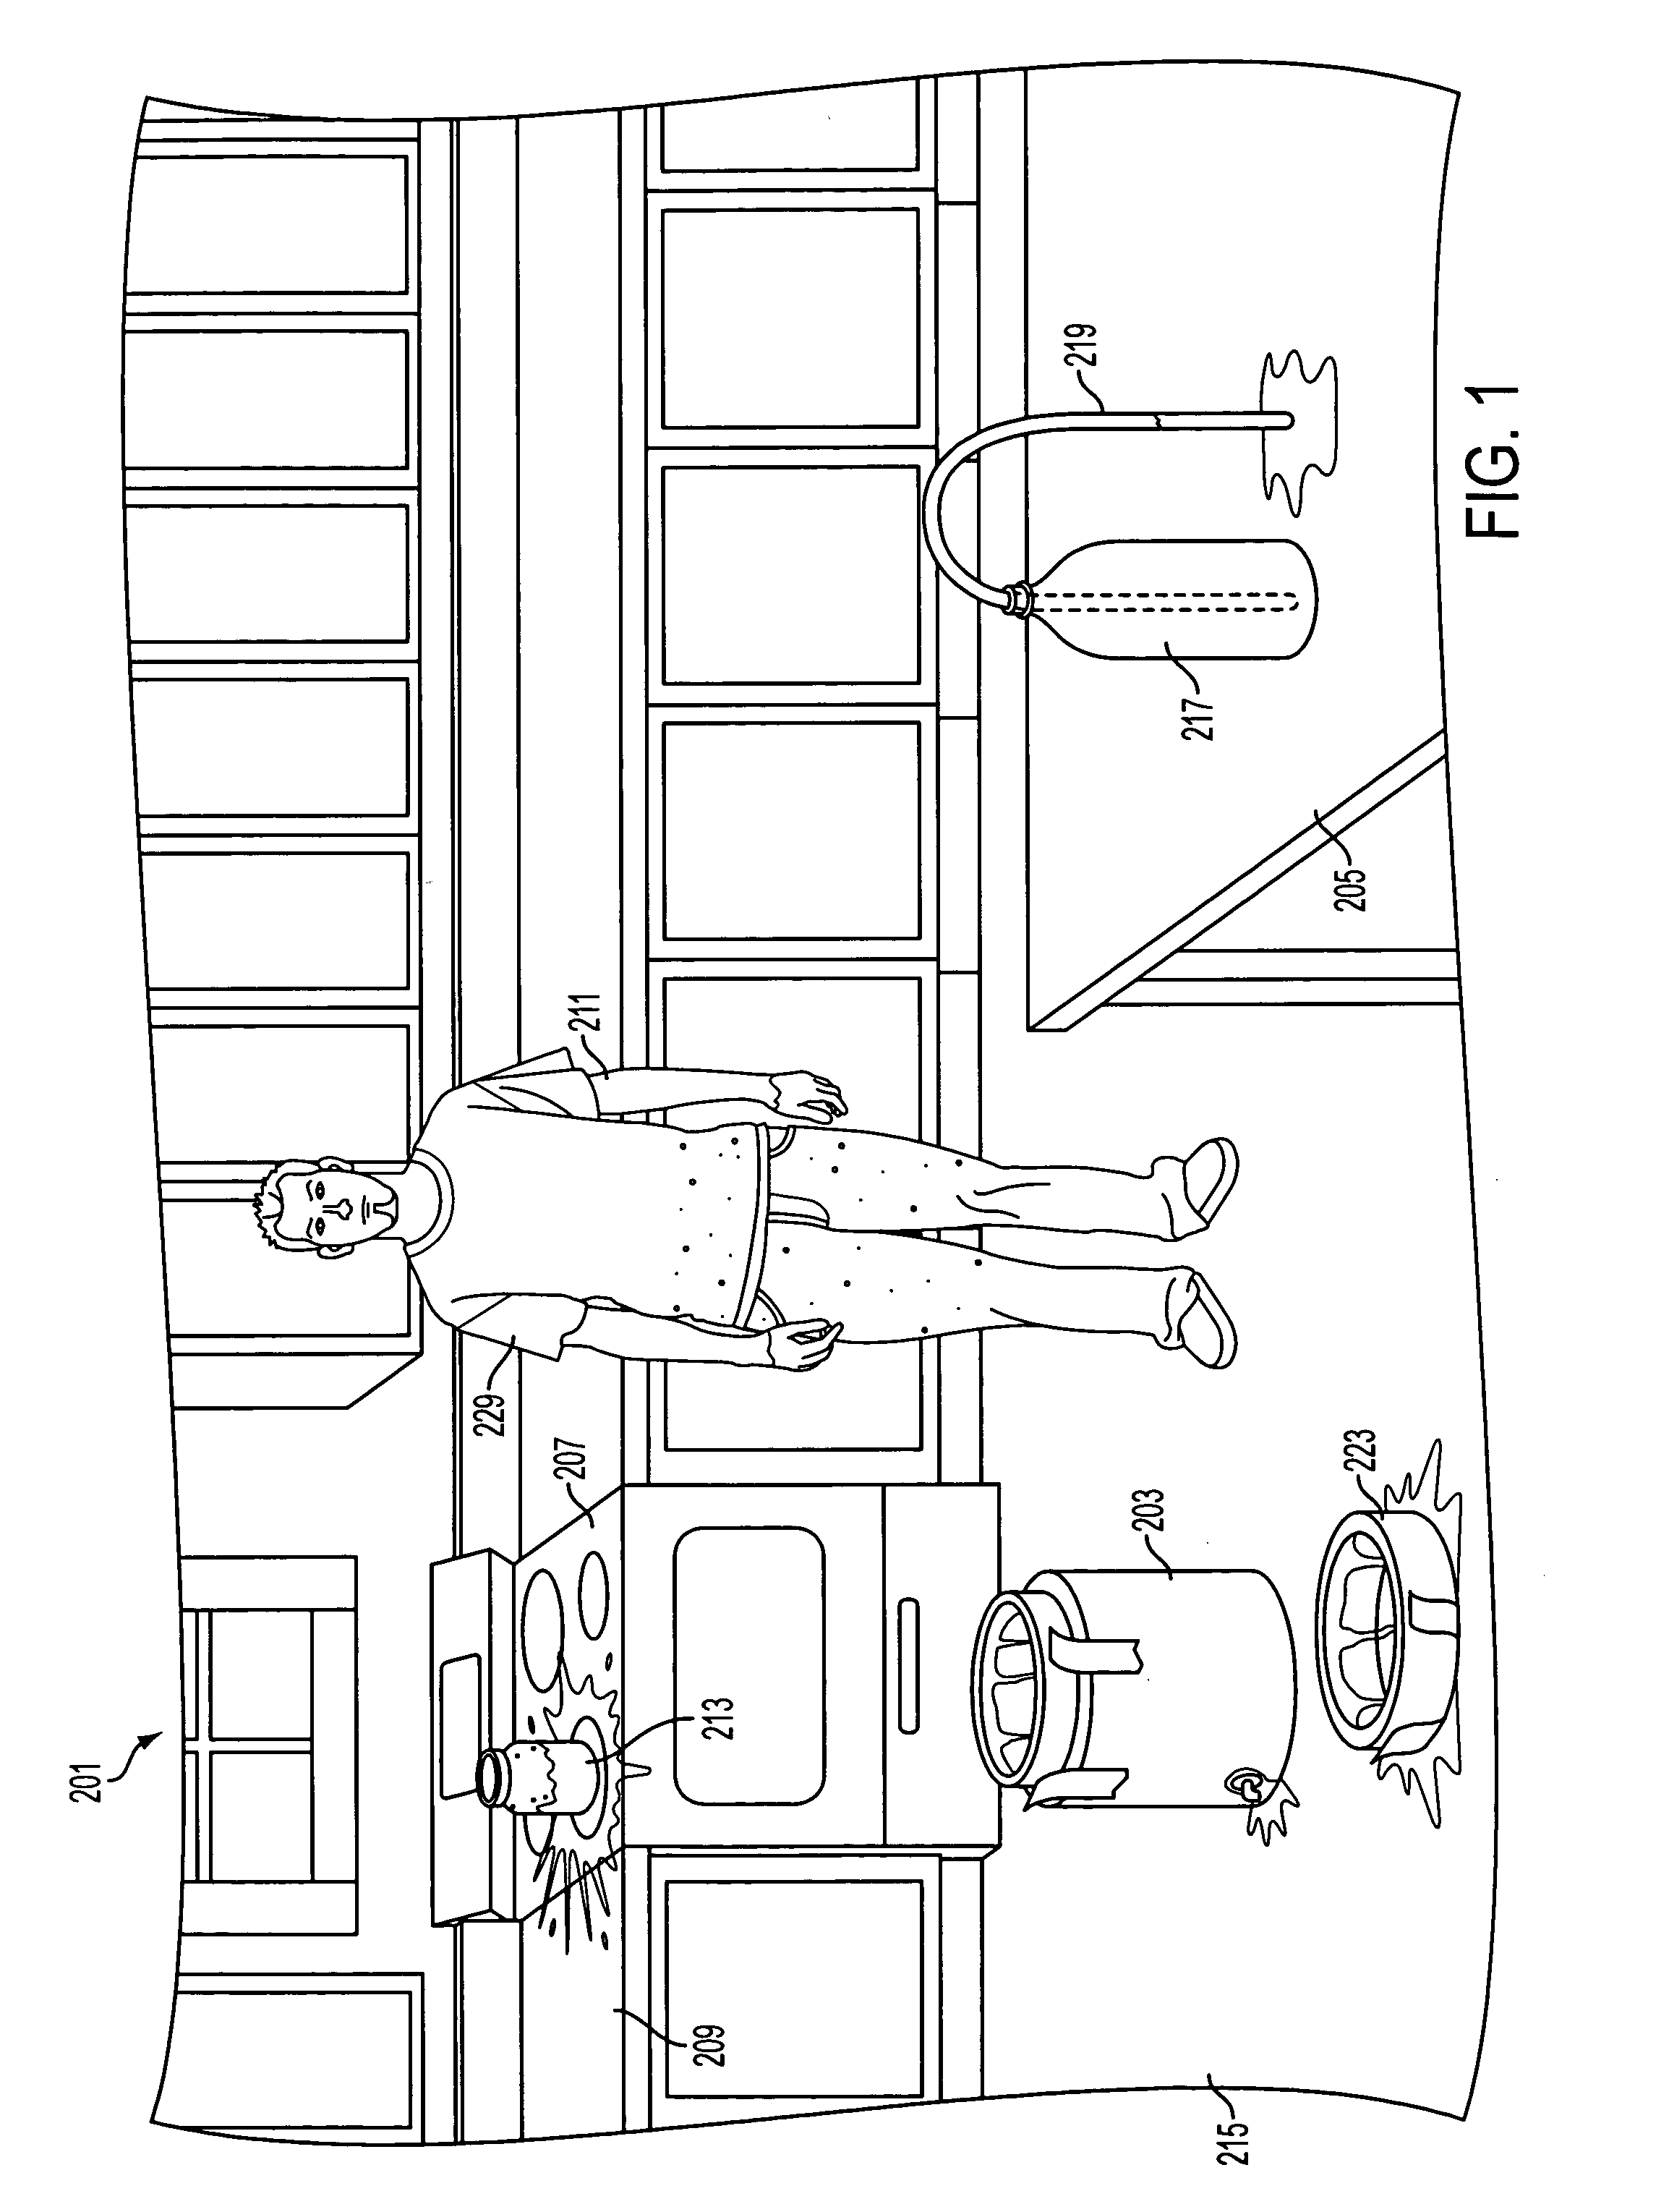 Dye solutions for use in methods to detect the prior evaporation of anhydrous ammonia and the production of illicit drugs